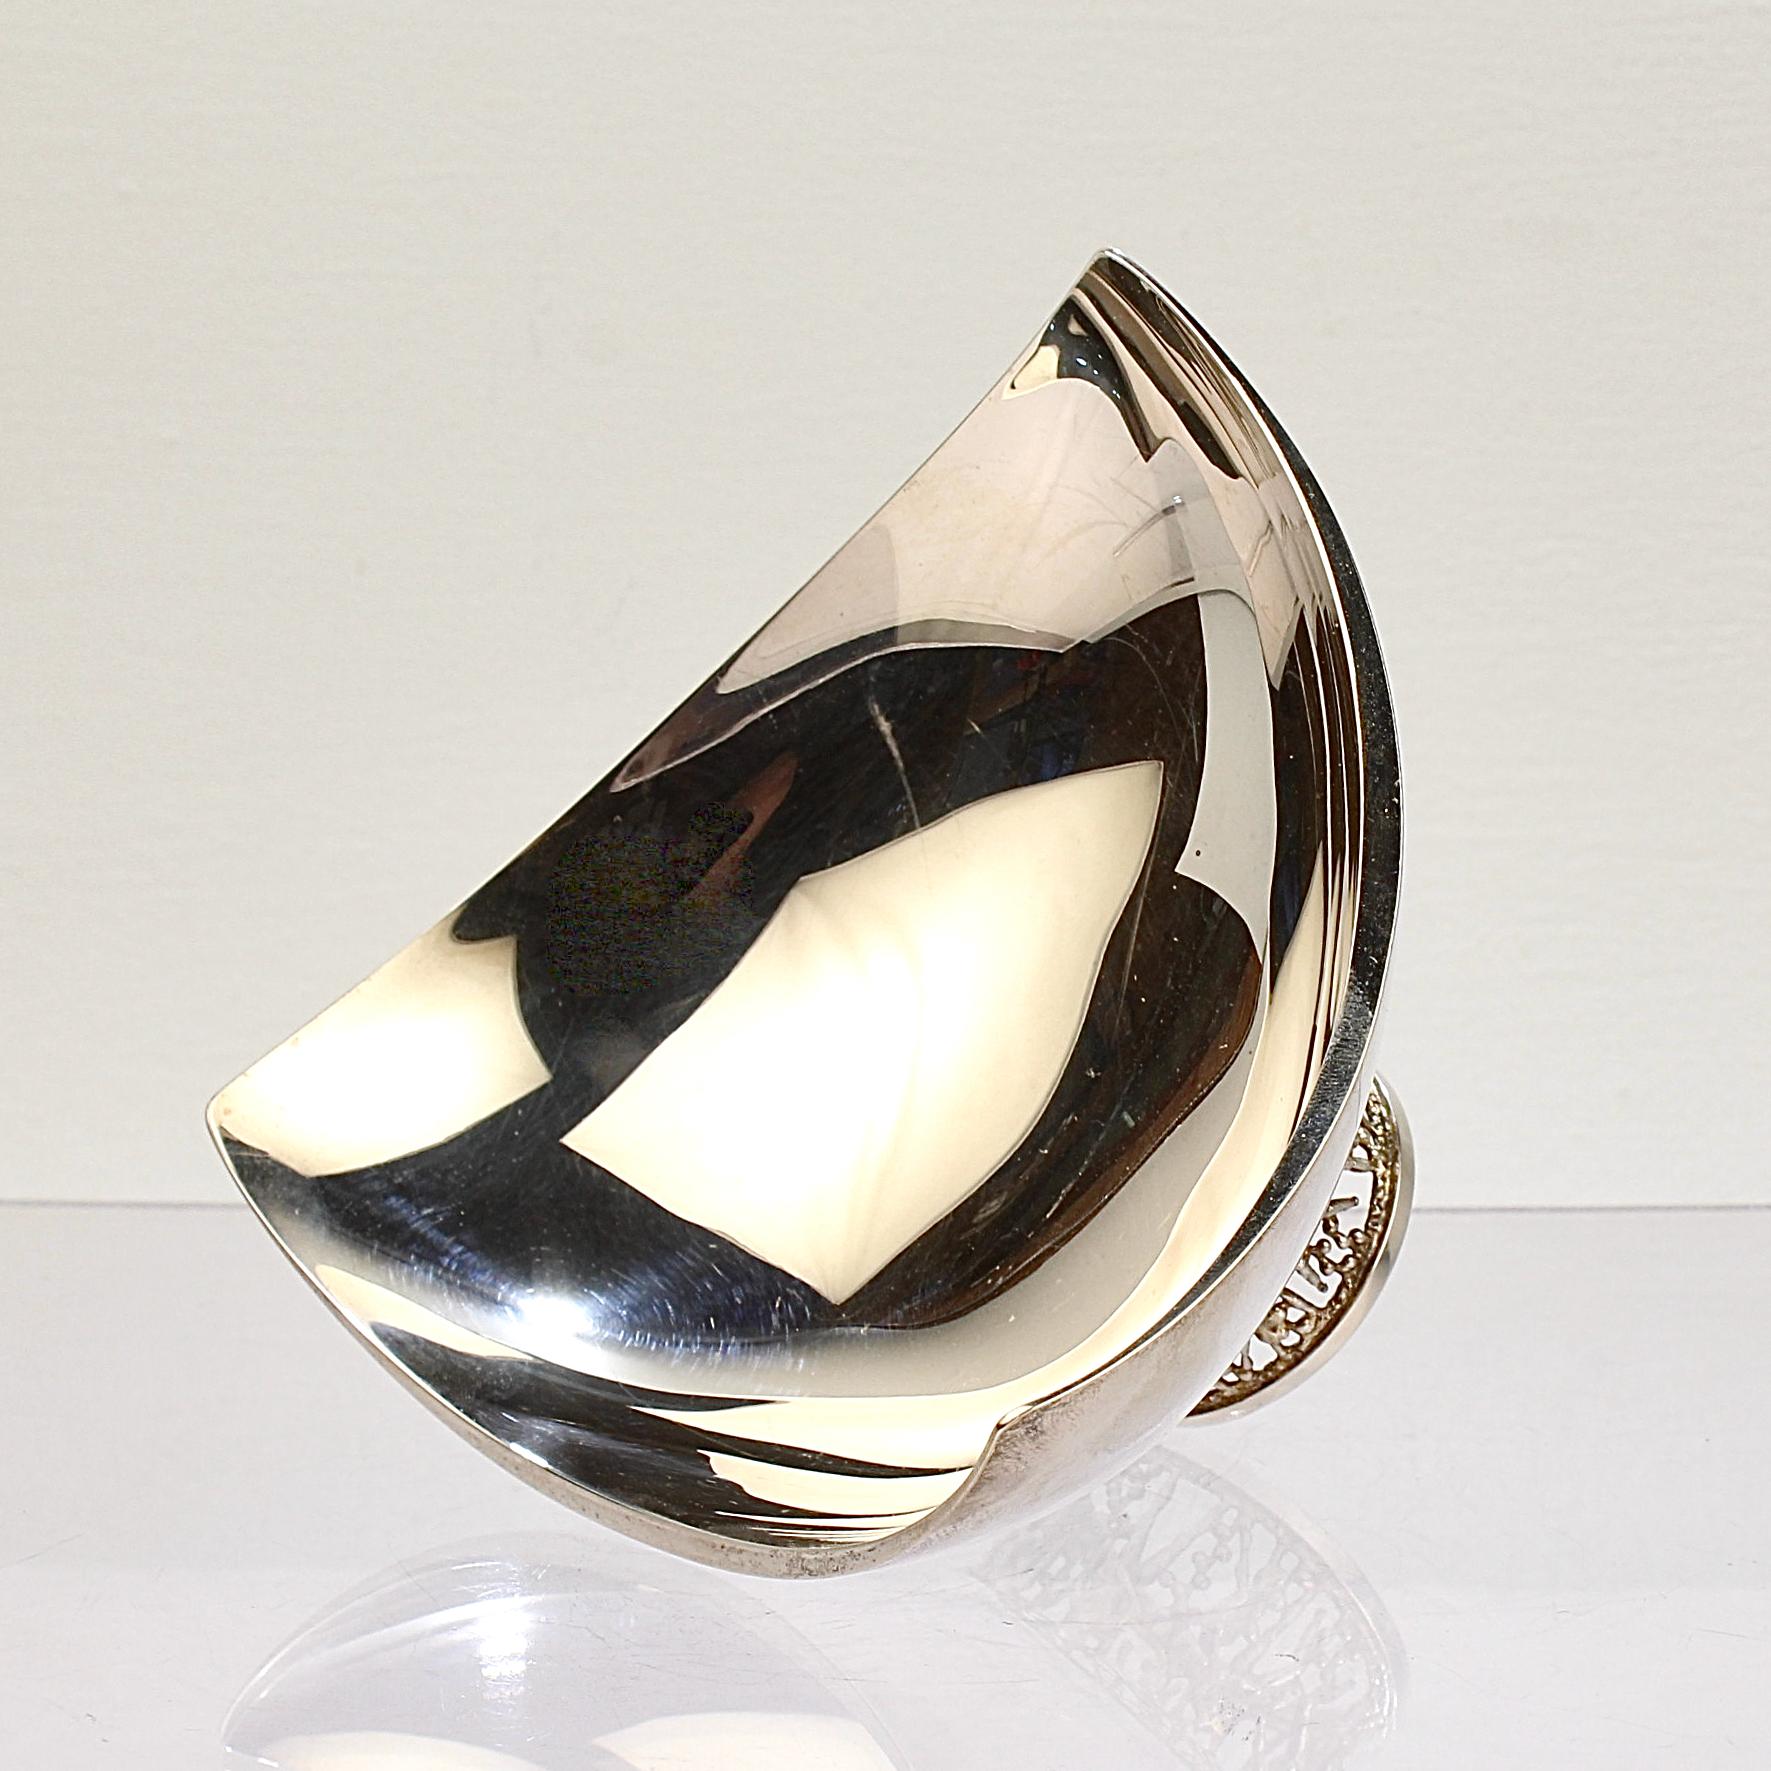 English 1980's Modernist Caryatic Sterling Silver Bowl by Stuart Devlin For Sale 5